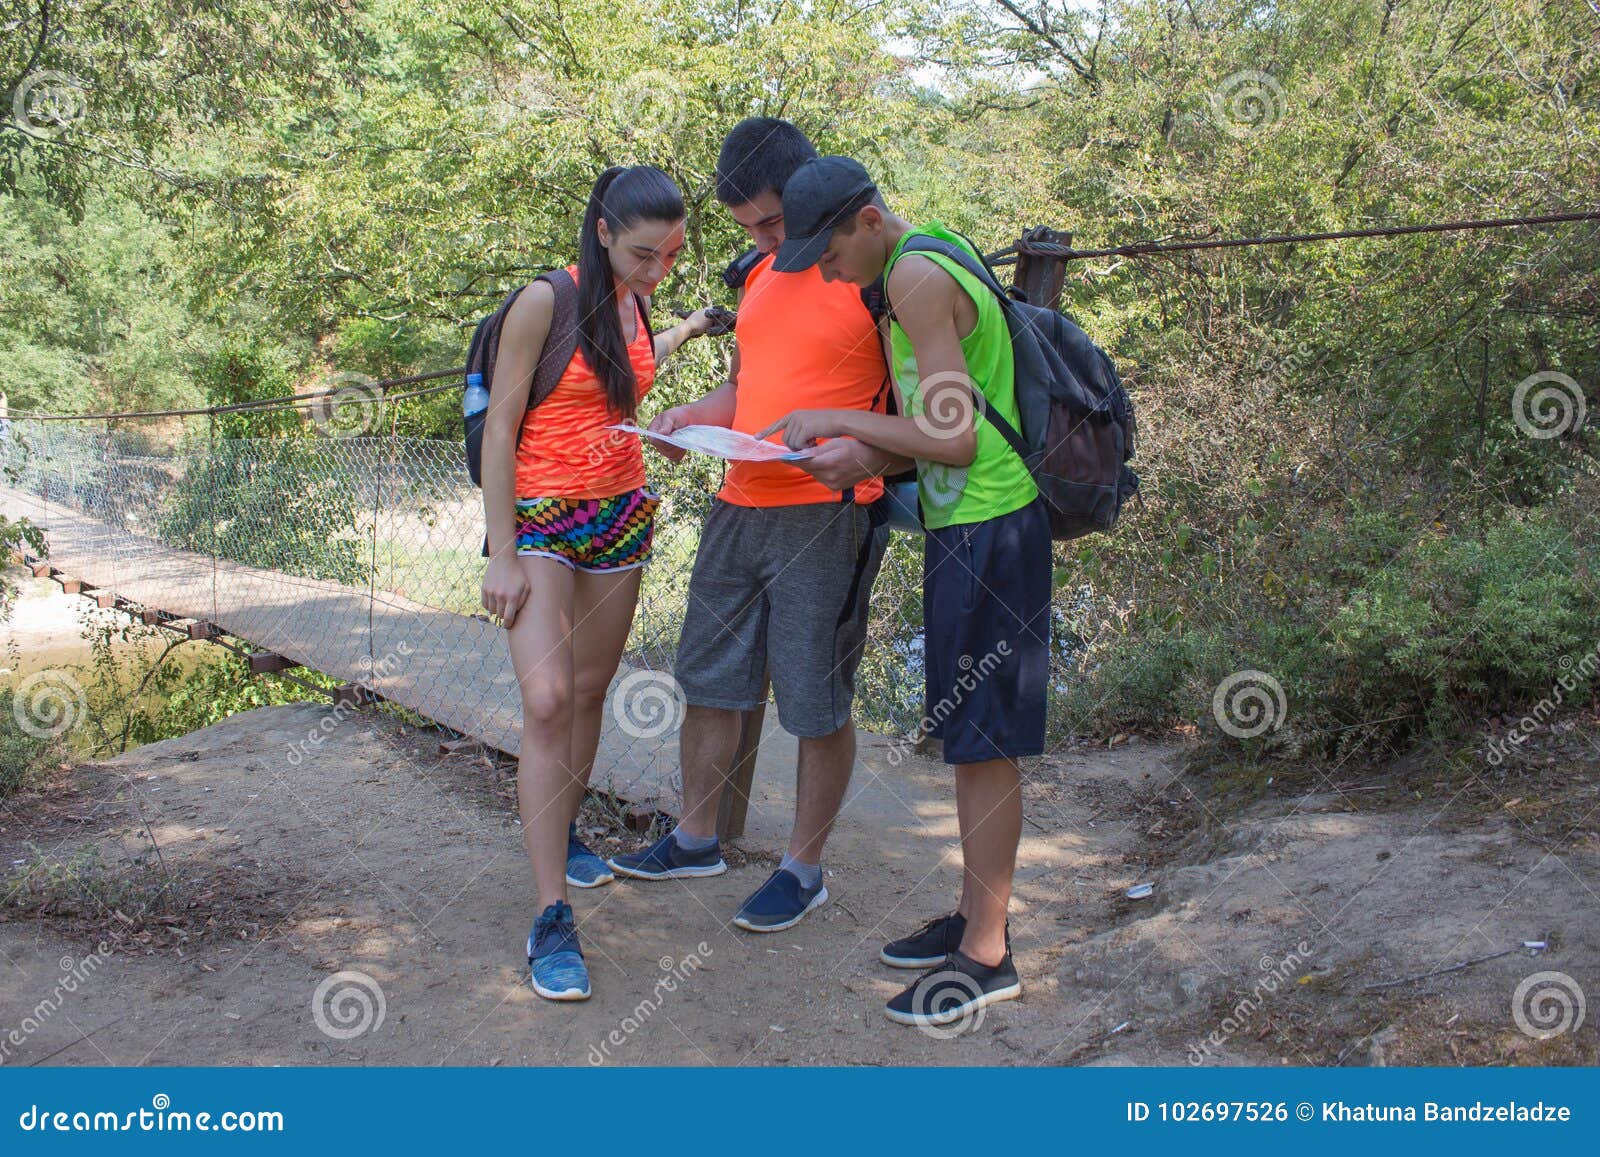 eco tourism and healthy lifestyle concept. young hiker girl end boys with backpack. travelers, hikers on vacation reading a map